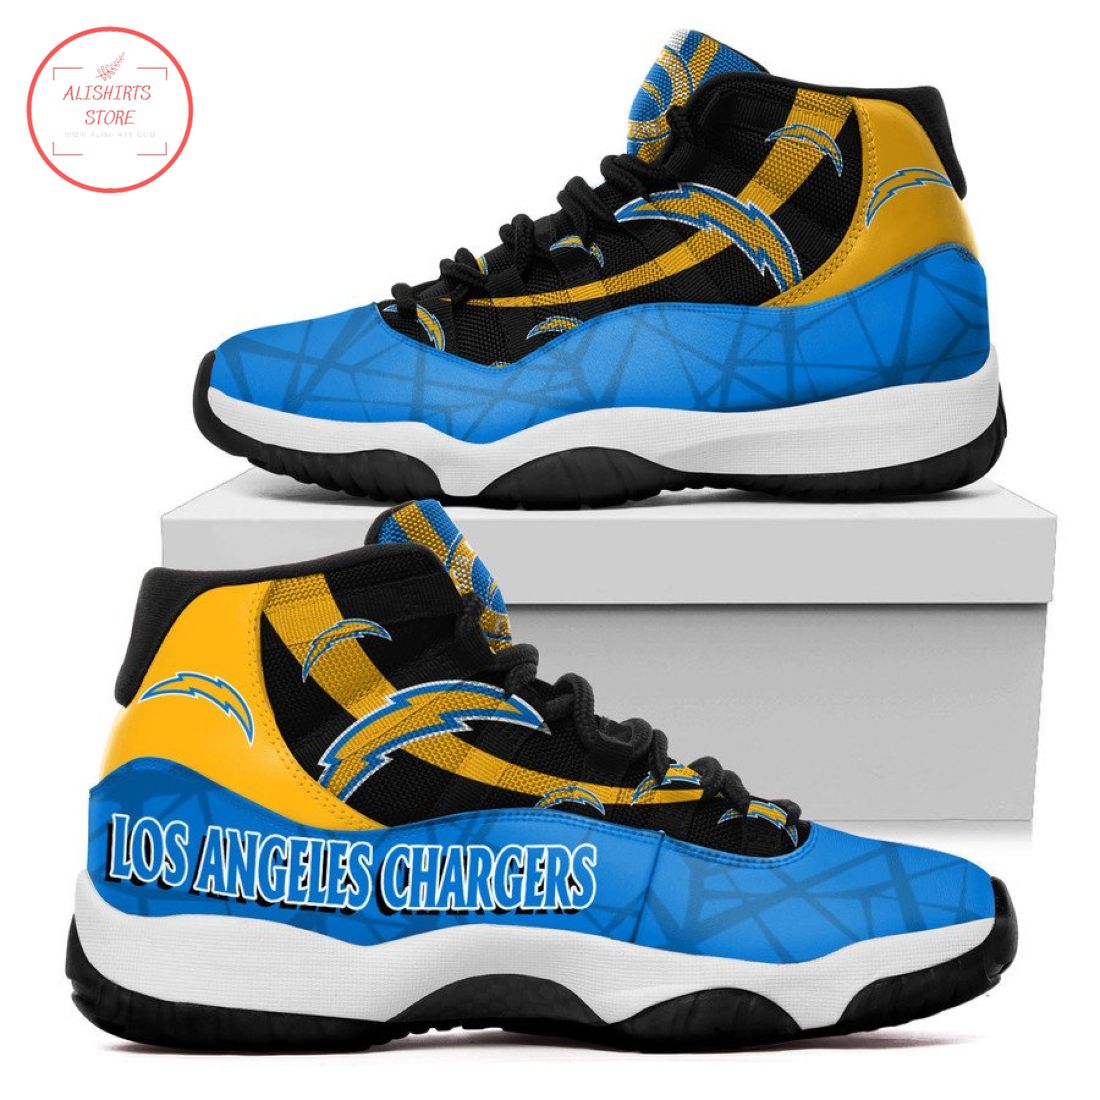 NFL Los Angeles Chargers New Air Jordan 11 Sneakers Shoes